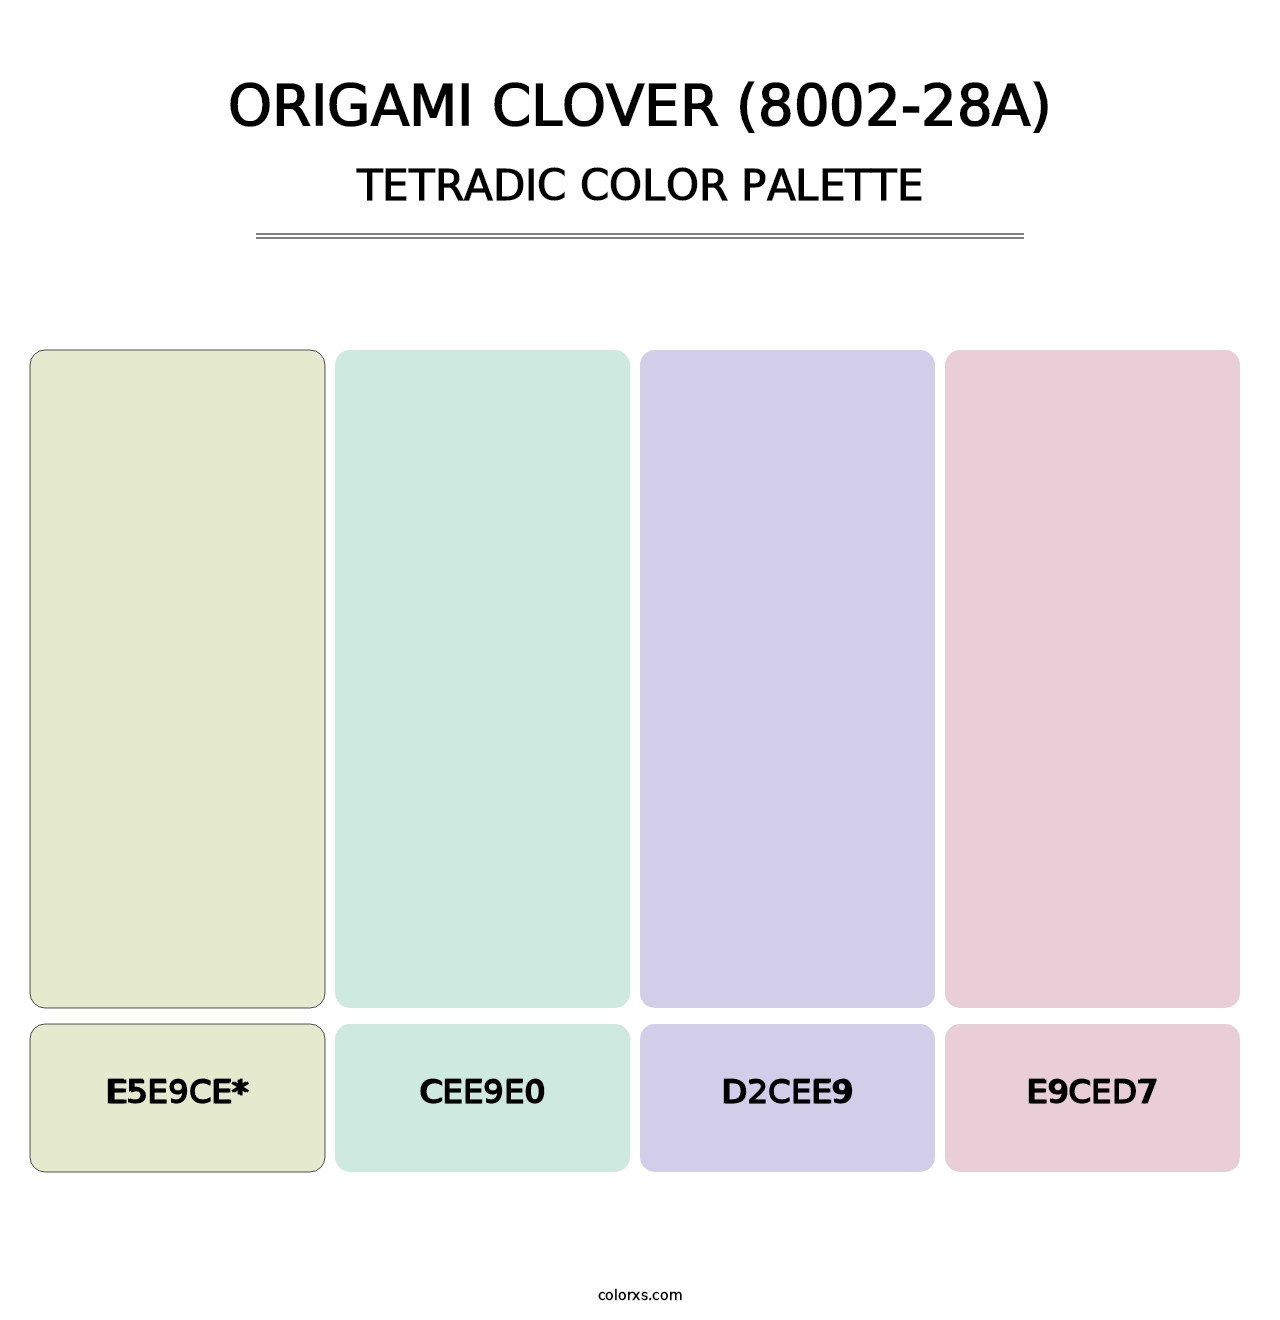 Origami Clover (8002-28A) - Tetradic Color Palette